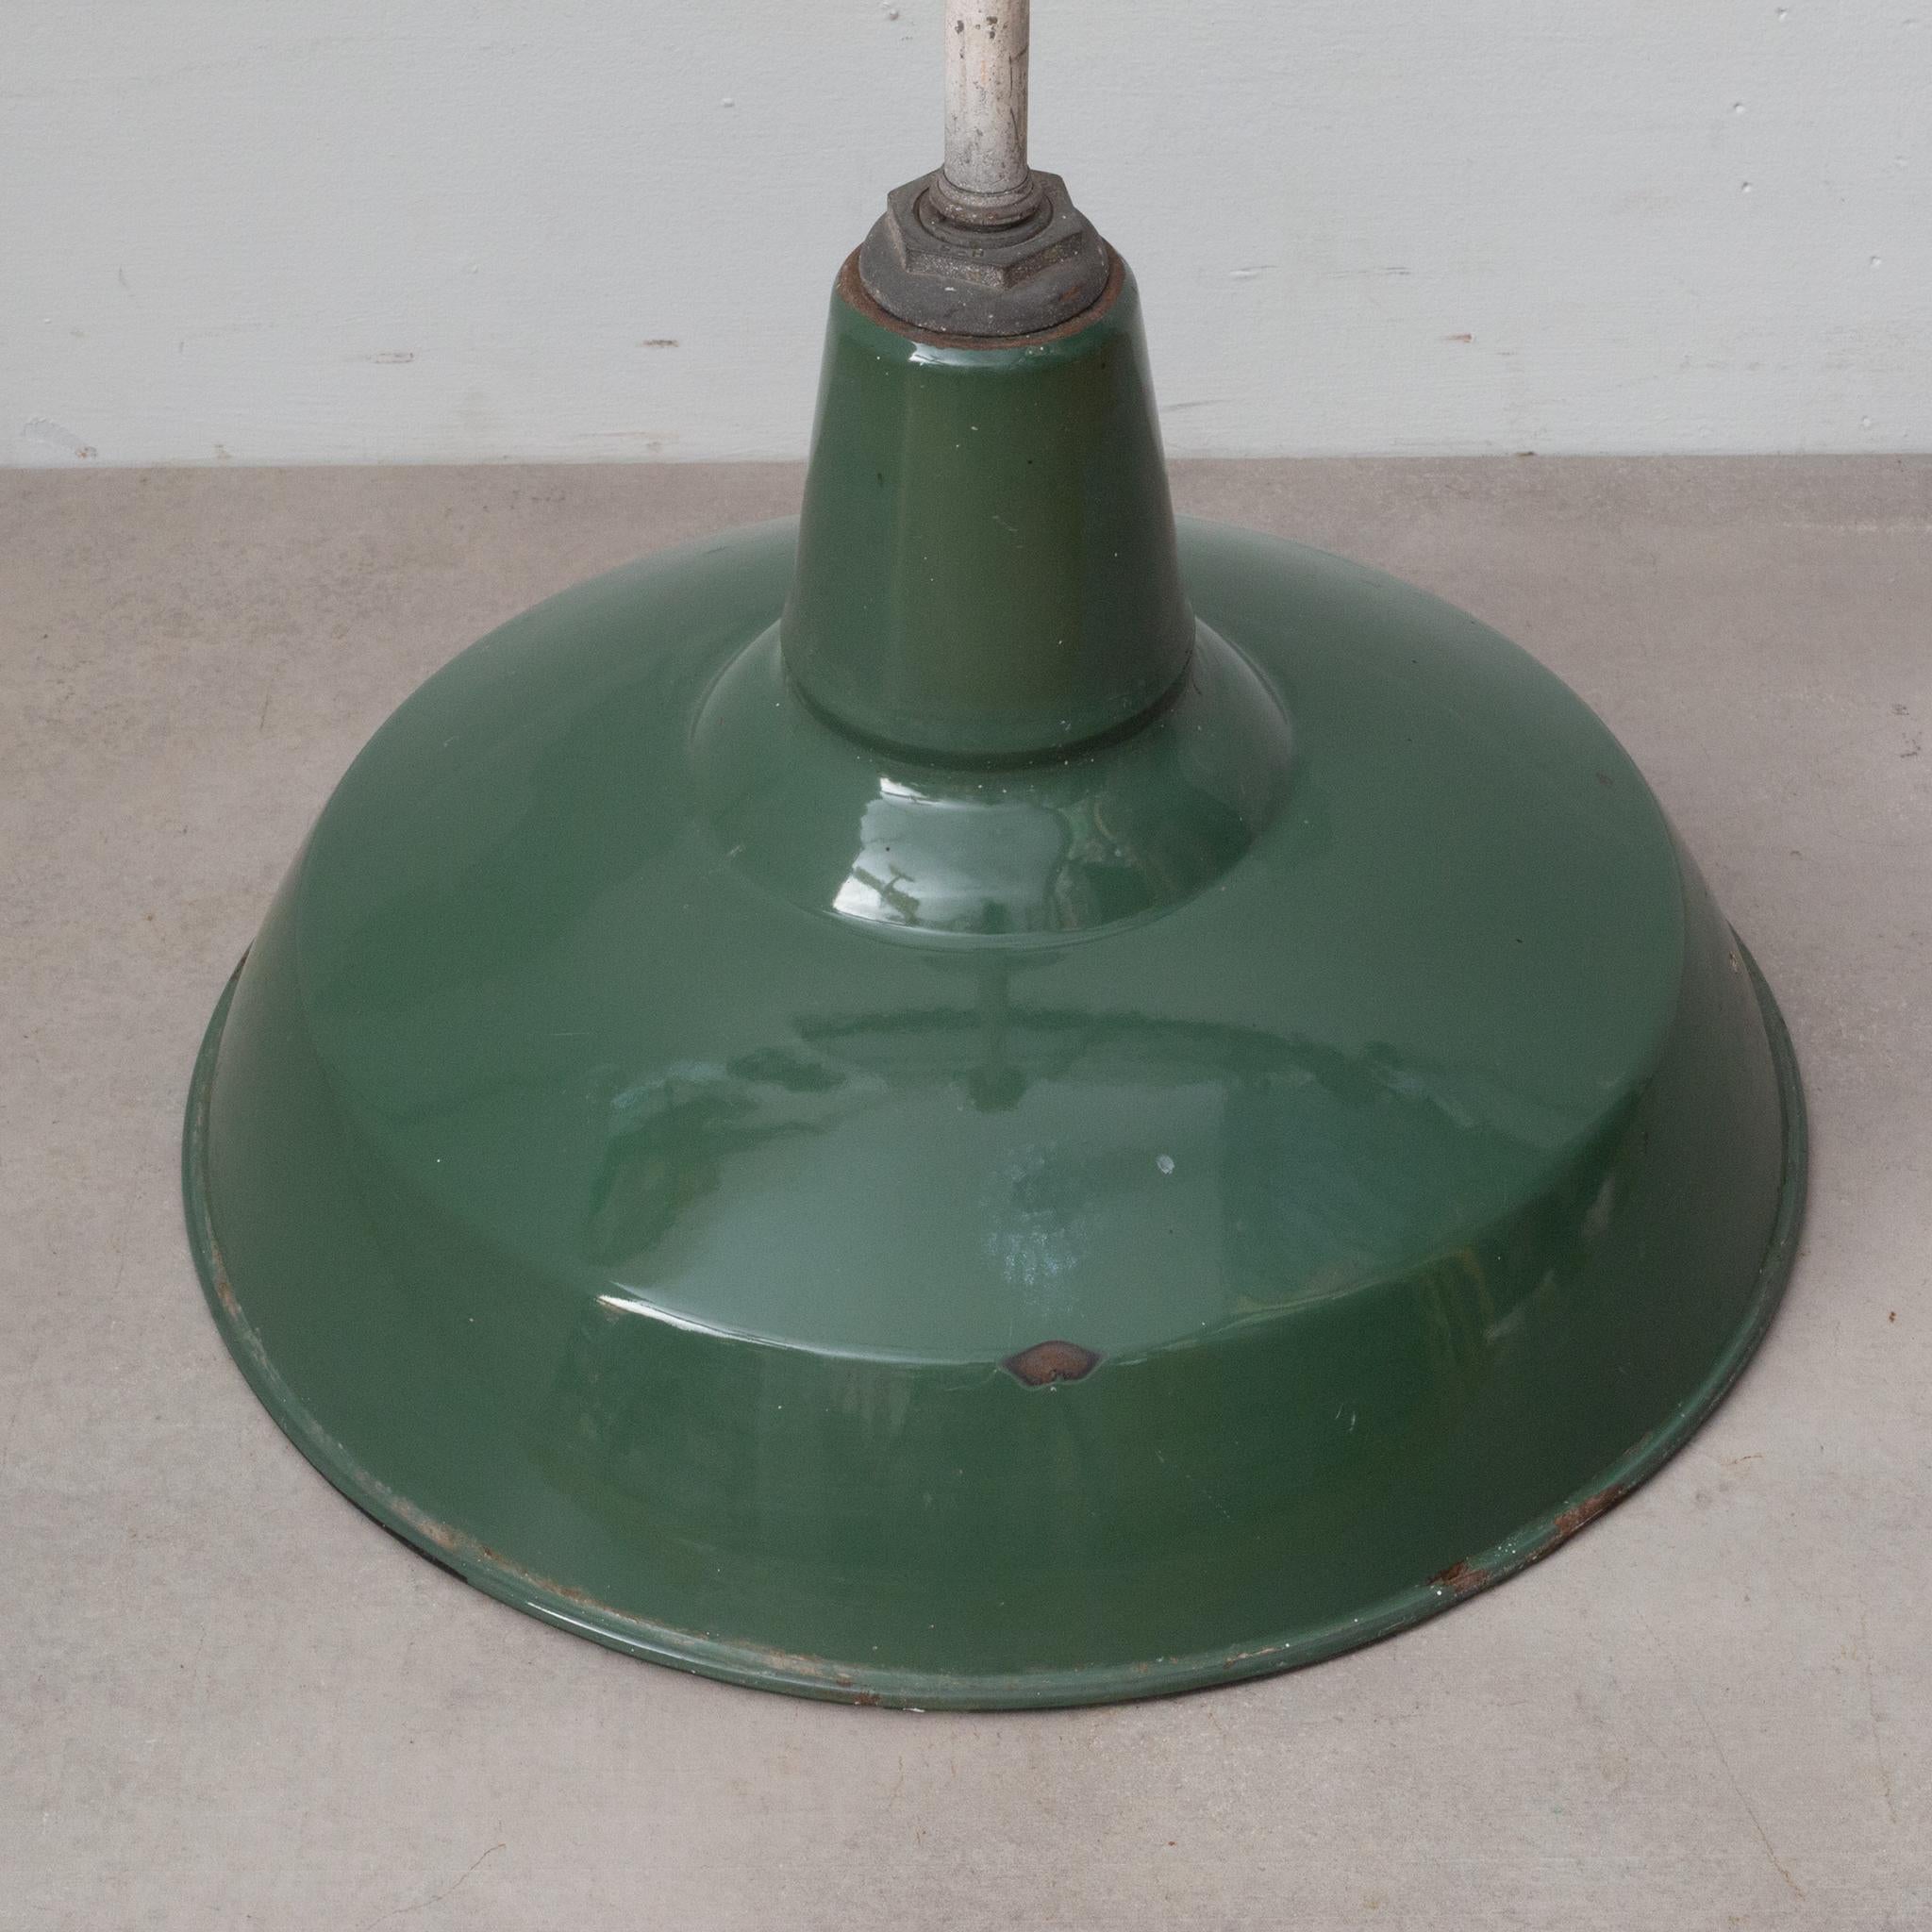 About:

Large one is available. Smaller one sold. 

Original large green enameled factory pendant light fixture with white porcelain interior and metal swivel joint canopies.

Creator: Benjamin Electric Mfg., Chicago.
Date of manufacture: